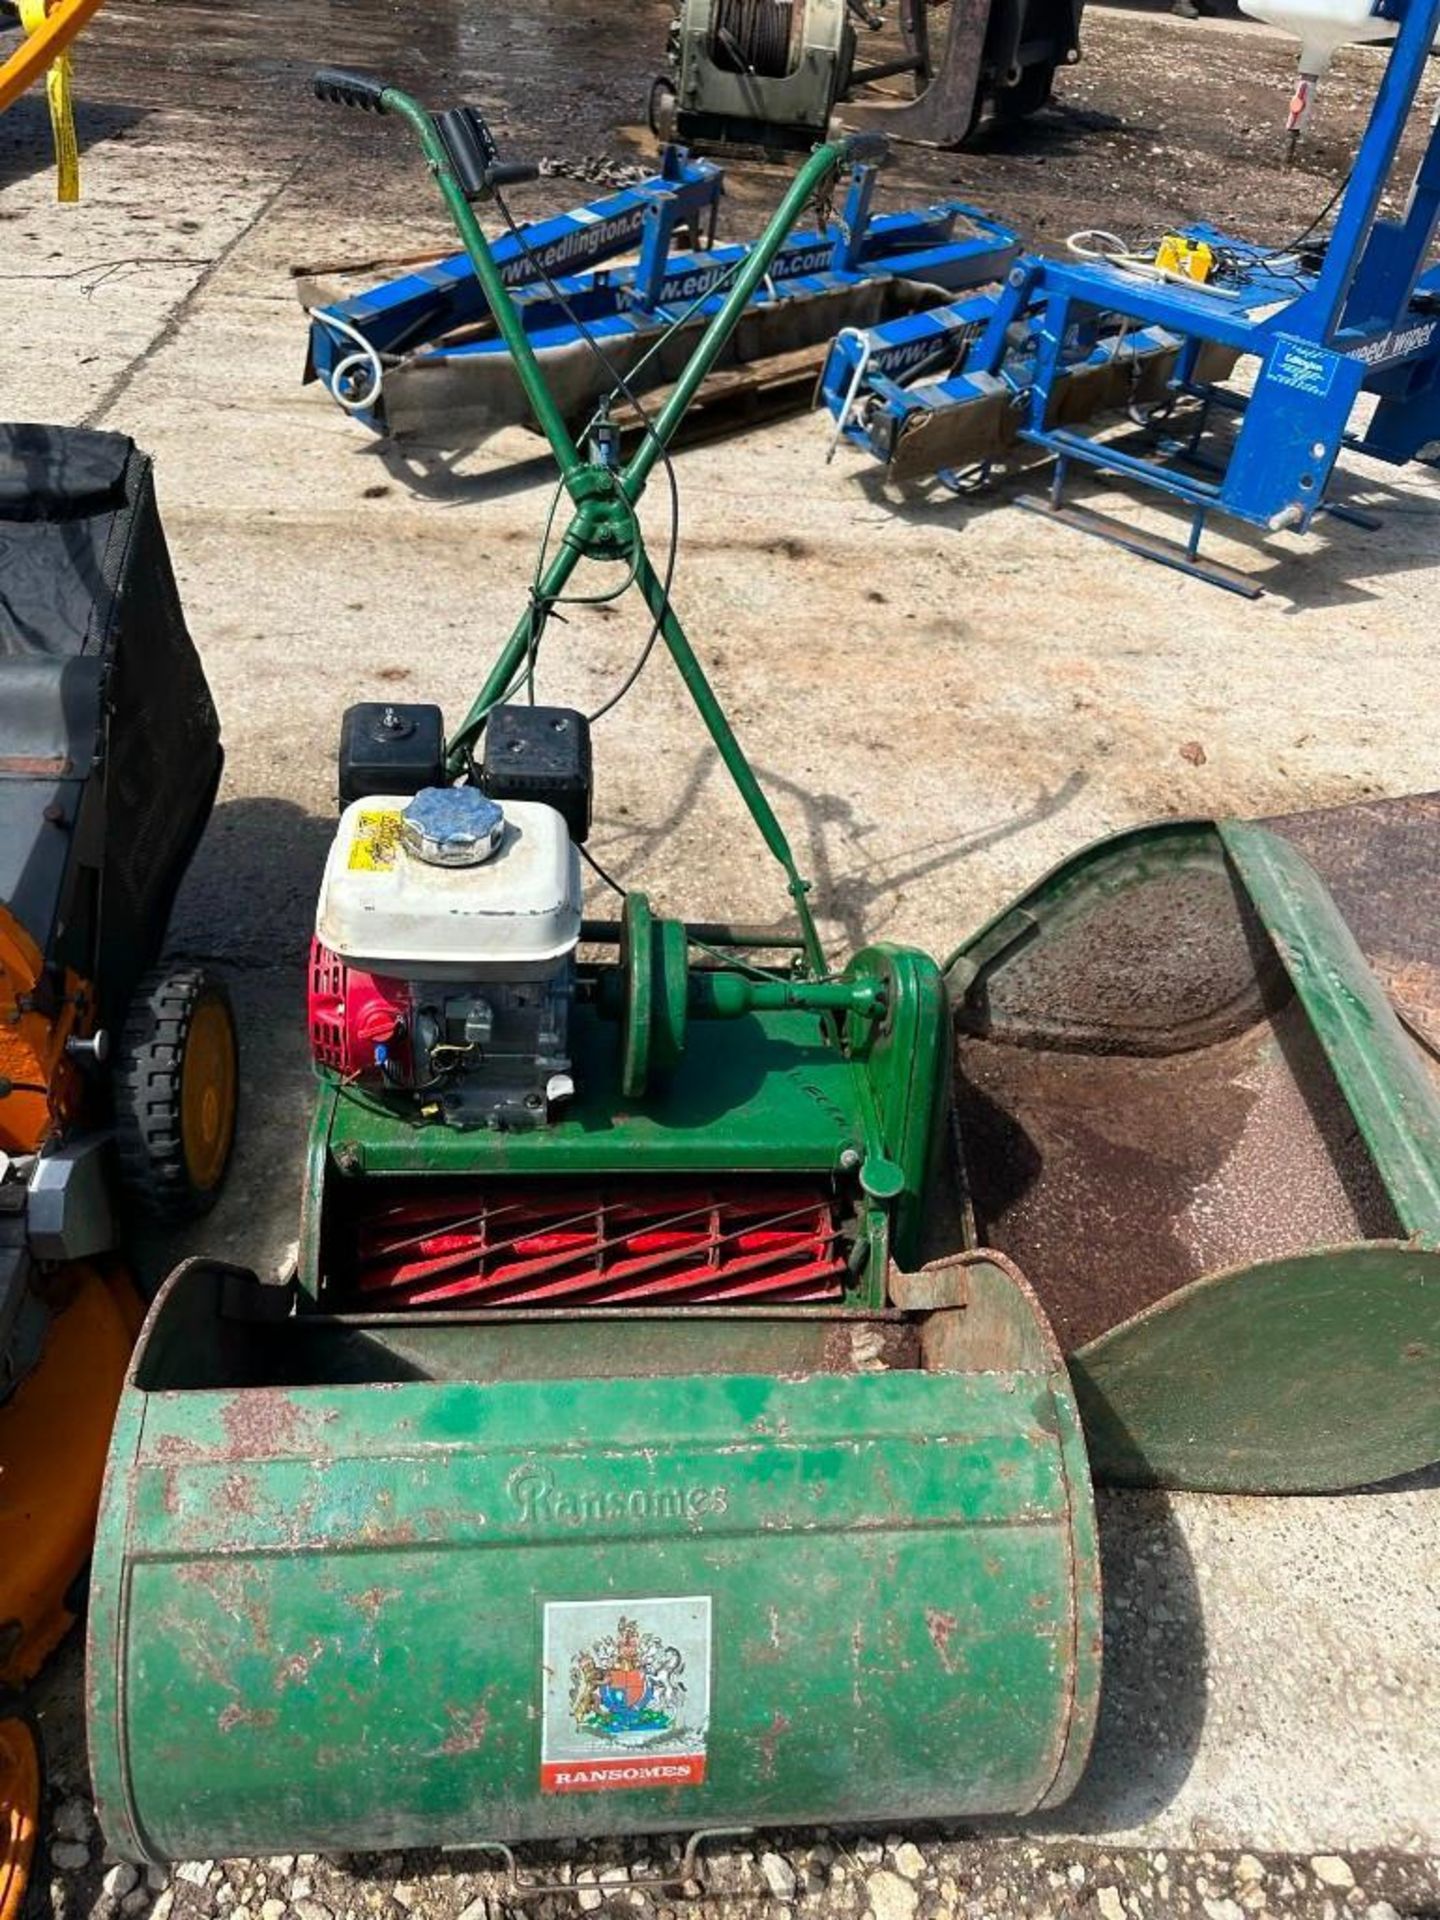 Ransomes pedestrian mower with Honda GX120 engine c/w spare collection barrel - Image 2 of 2